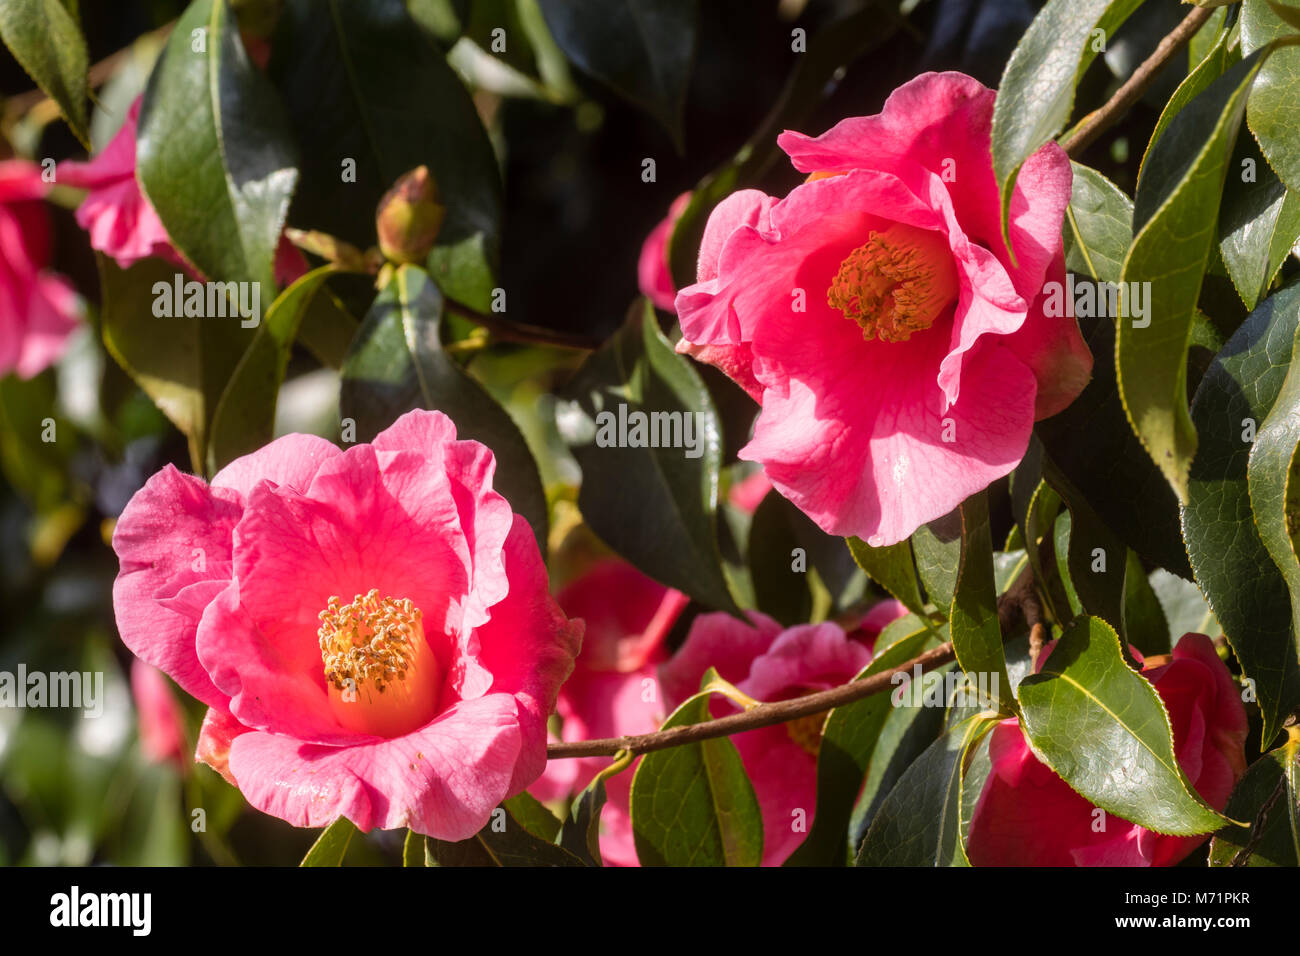 Flowers of the hybrid camellia, Camellia x williamsii 'Mary Christian' in late winter Stock Photo